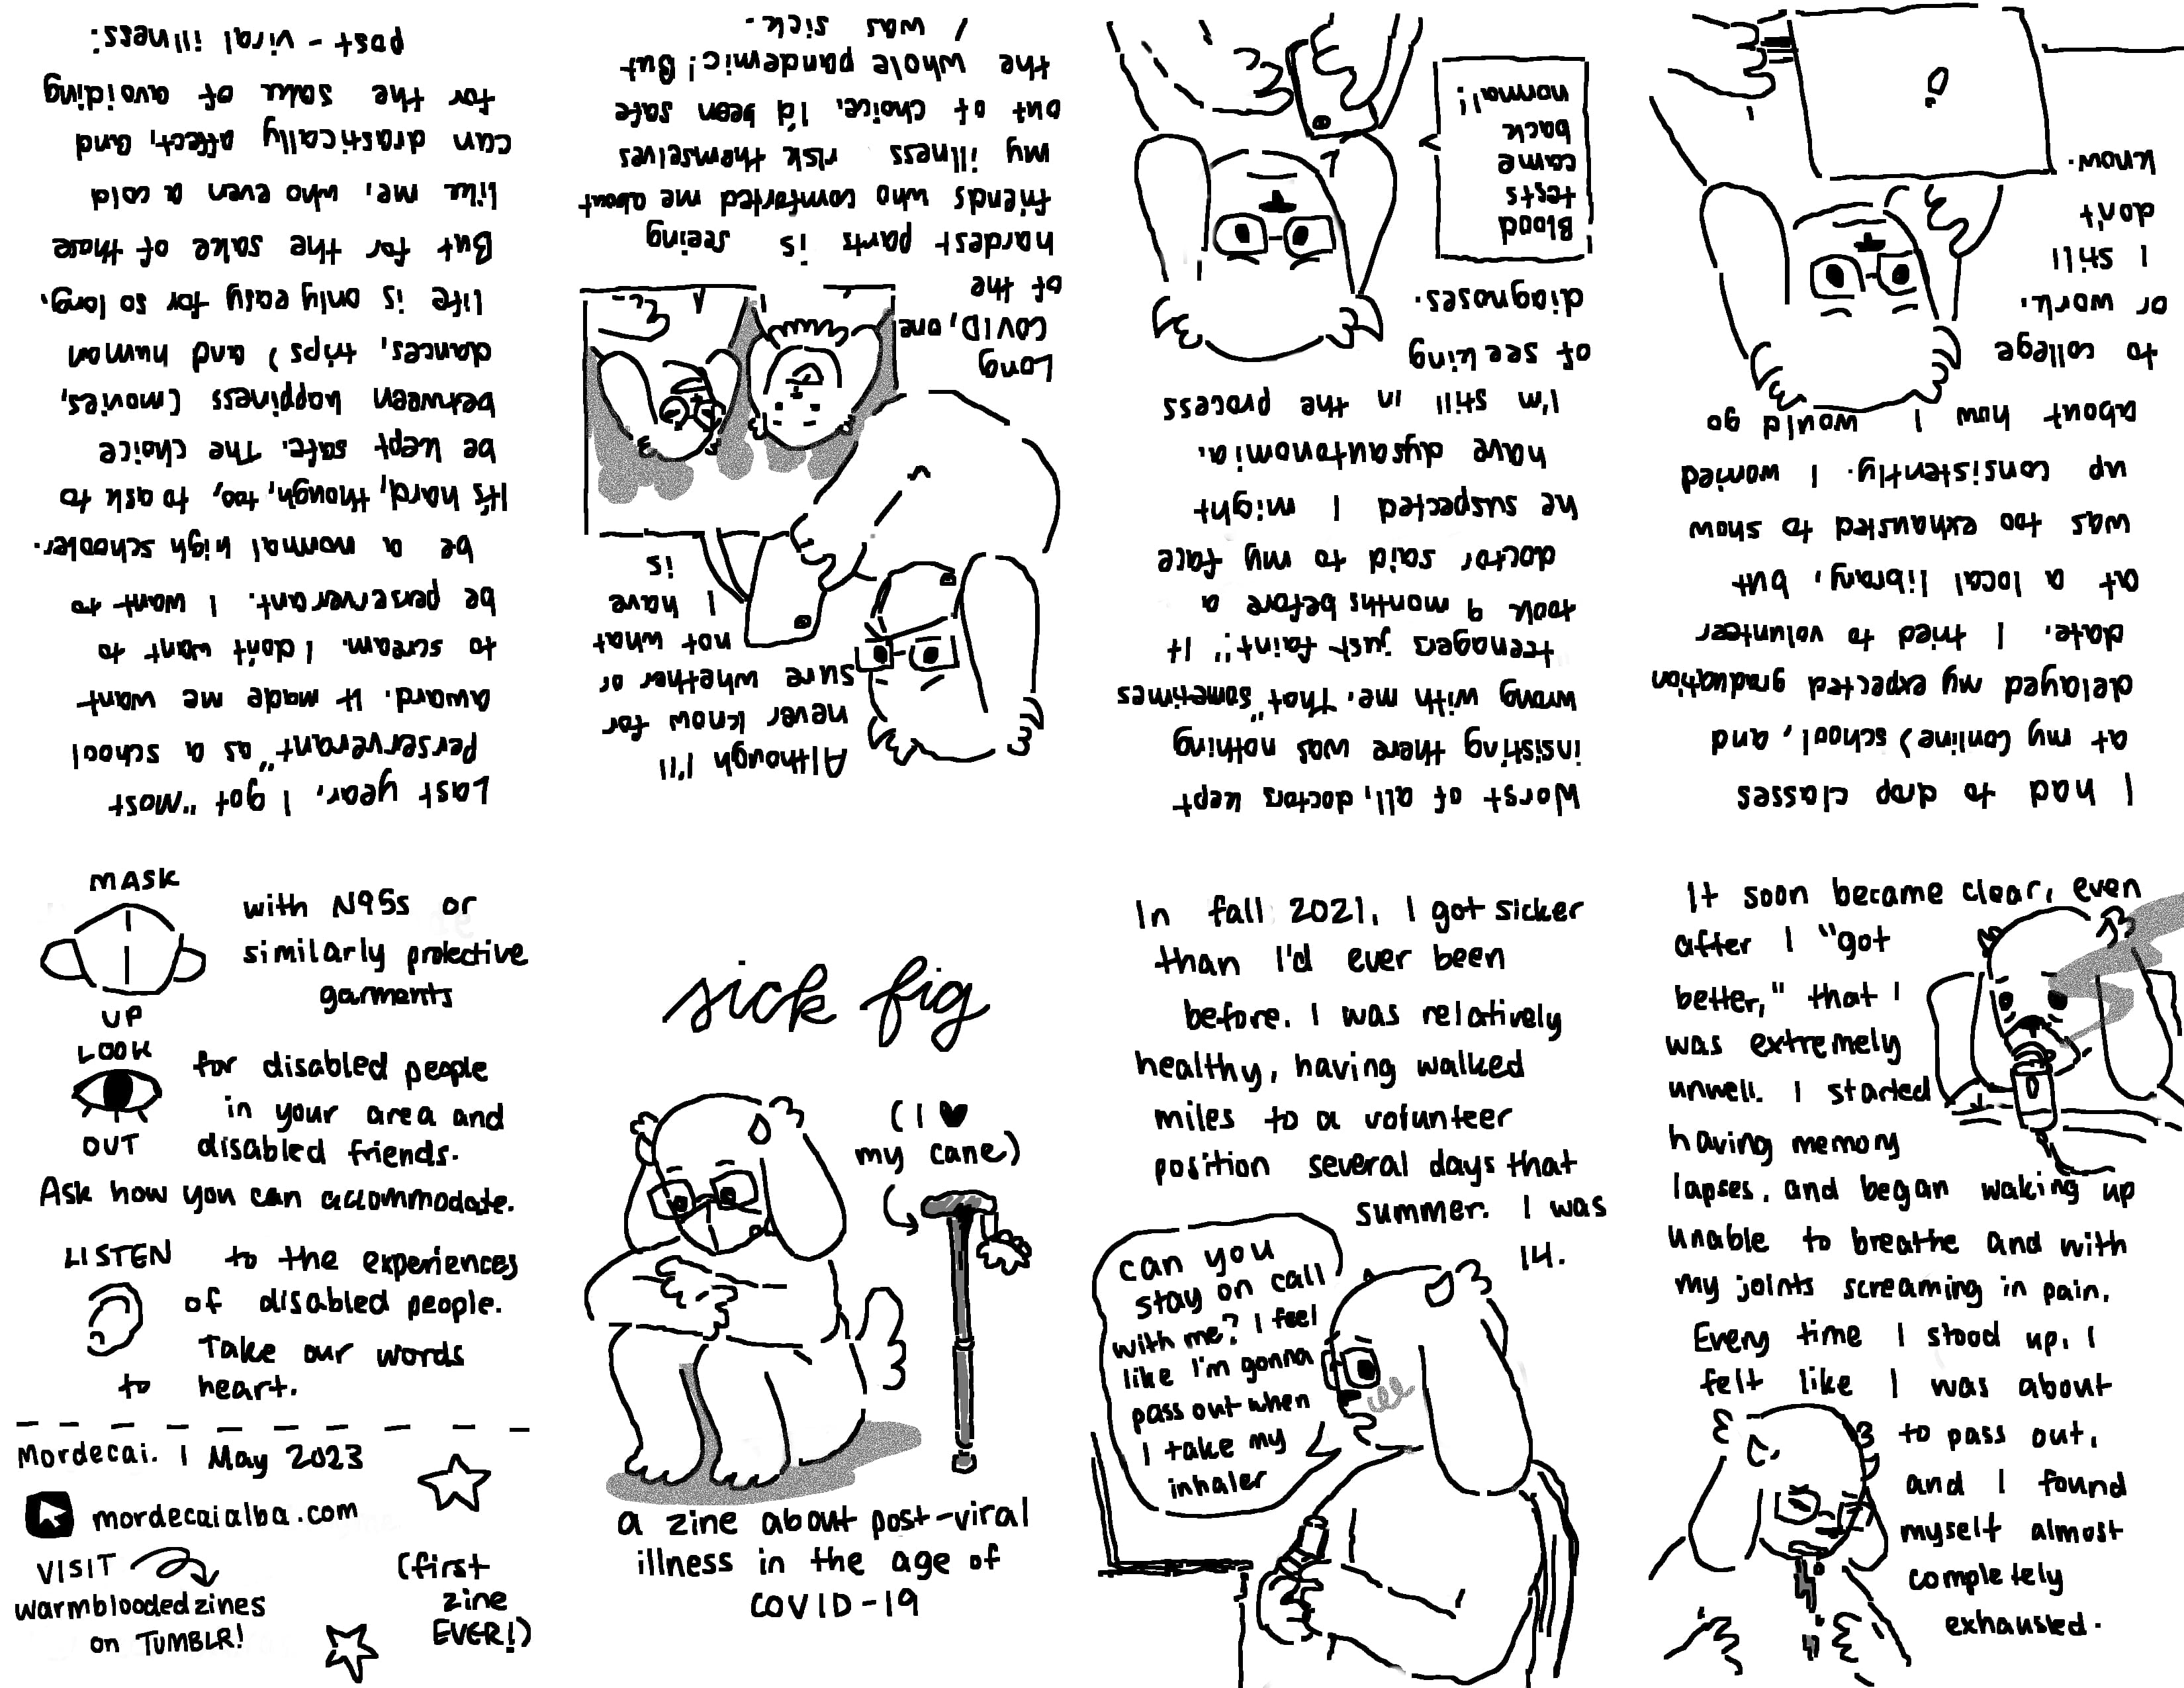 A zine in an 8-page layout. The first page has 'sick fig' written at the top in cursive, over an anthropomorphic jackalope with pointed horns, who is sitting on the ground with a mask and glasses on, next to a cane. In parentheses are (I heart my cane). At the bottom reads, 'a zine about post-viral illness in the age of COVID-19.' The second page says, 'In fall 2021, I got sicker than I'd ever been before. I was relatively healthy, having walked miles to a volunteer position several days that summer. I was 14.' The jackalope is sitting at a computer holding an inhaler, and looks anxious while saying, 'can you stay on call with me? I feel like I'm gonna pass out when I take my inhaler.' The third page says, 'It soon became clear, even after I 'got better,' that I was extremely unwell. I started having memory lapses, and began waking up unable to breathe and with my joints screaming in pain. Every time I stood up, I felt like I was about to pass out, and I found myself almost completely exhausted.' There are several small images: one of the jackalope in bed, tired with a nebulizer, and one of the jackalope vomiting. The fourth page says, 'I had to drop classes at my (online) school, and delayed my expected graduation date. I tried to volunteer at a local library, but was too exhausted to show up consistently. I worried about how I would go to college or work. I still don't know.' There is a picture of the jackalope at a computer, looking anxious. The fifth page says, 'Worst of all, doctors kept insisting there was nothing wrong with me. That 'sometimes teenagers just faint.' It took 9 months before a doctor said to my face he suspected I might have dysautonomia. I'm still in the process of seeking diagnoses.' There is a picture of the jackalope looking at a phone and frowning, while a bubble appears from the phone that reads, 'Blood tests came back normal!' The sixth page says, 'Although I'll never know whether or not what I have is Long COVID, one of the hardest parts is seeing friends who comforted me about my illness risk themselves out of choice. I'd been safe the whole pandemic! But I was sick.' There is a picture of the jackalope with a mask on looking at a phone, on which a picture of two other rabbits can be seen where they are in a large crowd, laughing. The seventh page says, 'Last year, I got 'Most Perserverant' as a school award. It made me want to scream. I don't want to be perserverant. I want to be a normal high schooler. It's hard, though, to ask to be kept safe. The choice between happiness (movies, dances, trips) and human life is only easy for so long. But for the sake of those like me, who even a cold can drastically affect, and for the sake of avoiding post-viral illness:' The eighth page says, 'MASK UP' (with a picture of a mask) 'with N95s or similarly protective garments,' 'LOOK OUT' (with a picture of an eye) 'for disabled people in your are and disabled friends. Ask how you can accommodate,' 'LISTEN' (with a picture of an ear) 'to the experiences of disabled people. Take our words to heart.' Below these is a dotted line, underneath which says: 'Mordecai. 1 May 2023.' There is an image of a cursor next to 'mordecaialba.com', then VISIT in all caps with an arrow pointing to 'warmbloodedzines on TUMBLR!' Additionally, there are several stars, and '(first zine EVER!)'